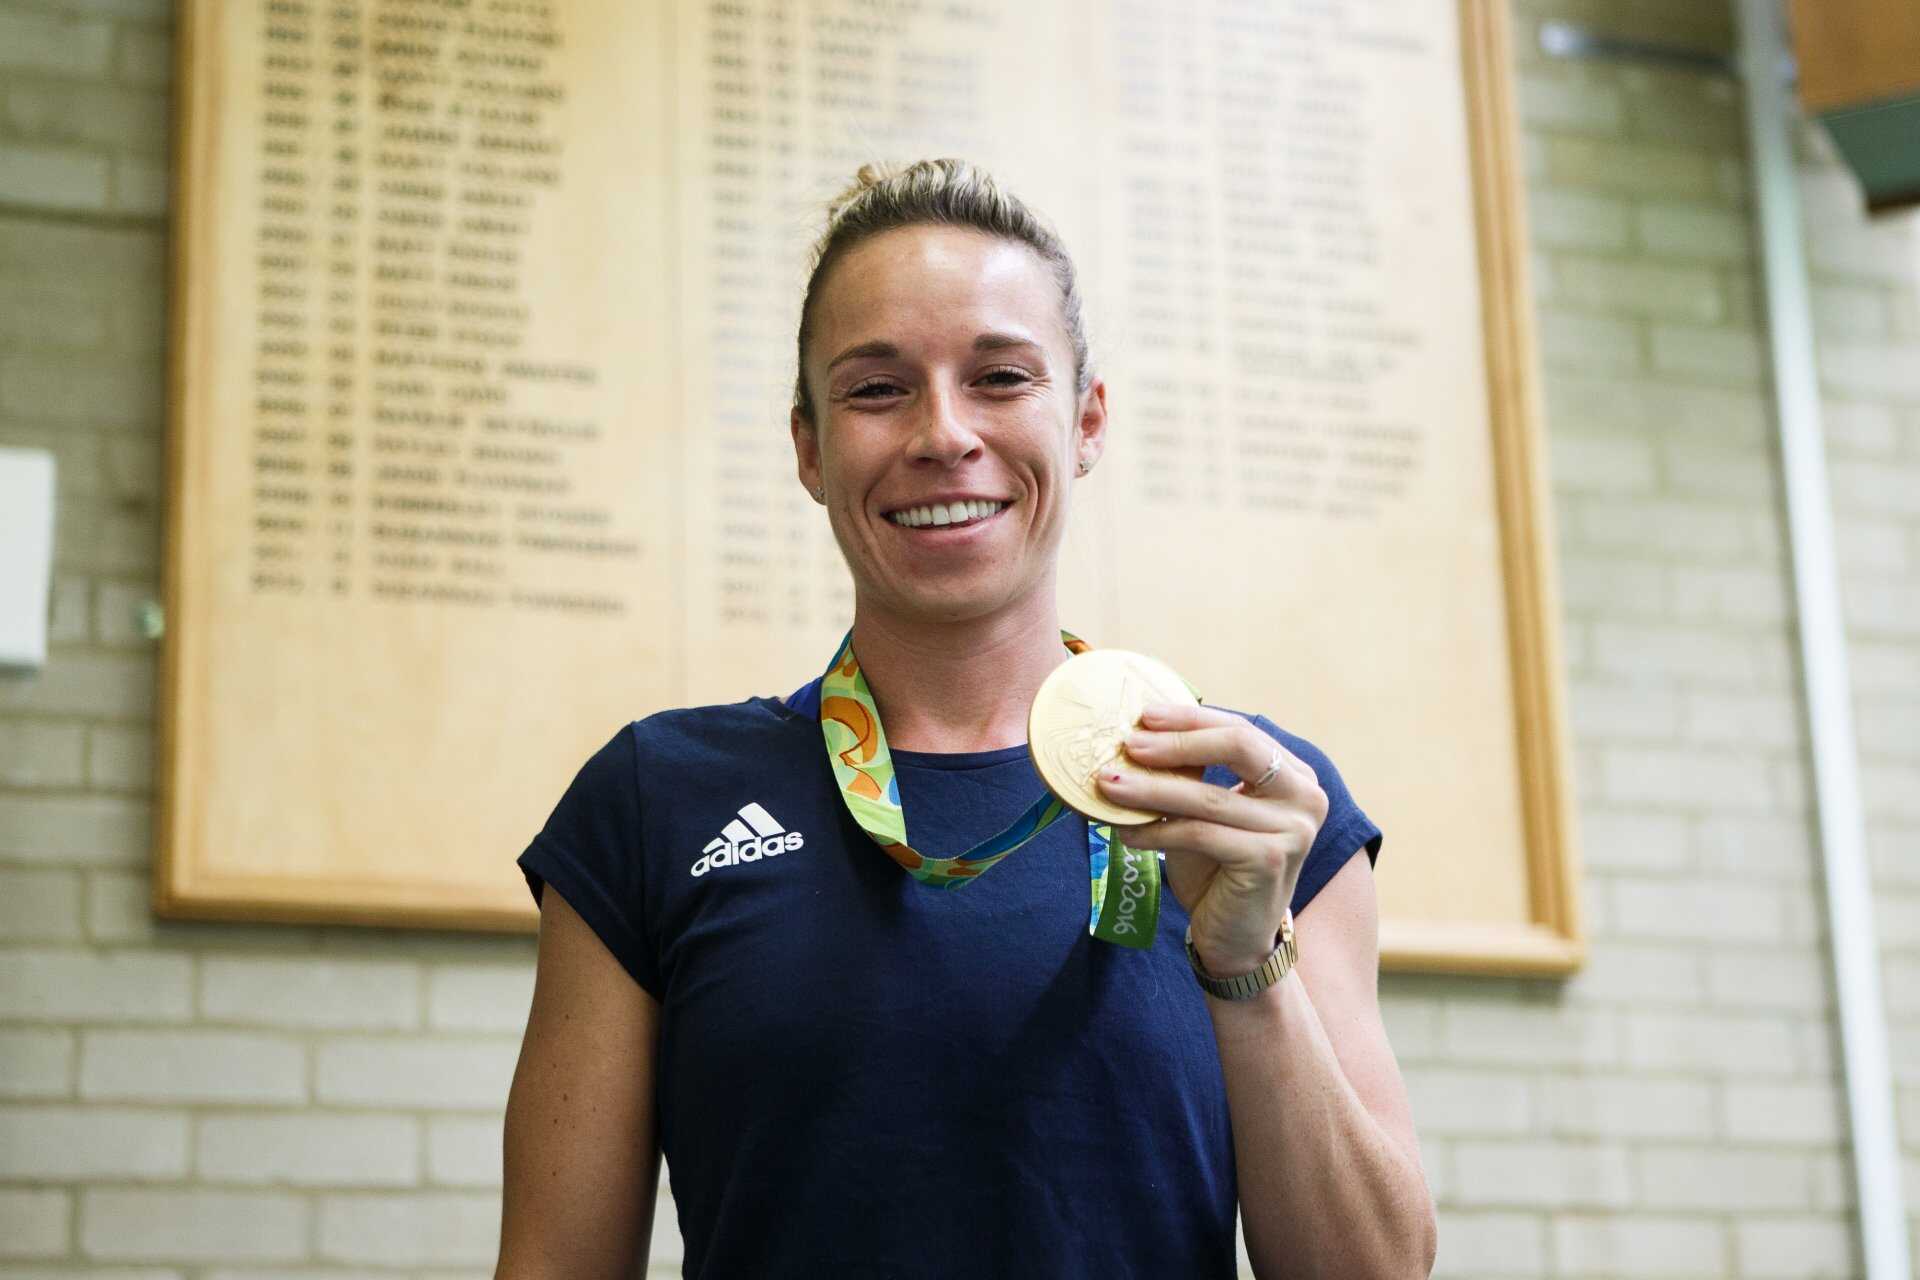 Susannah Townsend stood near the roll of honour in the Kent Sports Centre, holding her gold medal